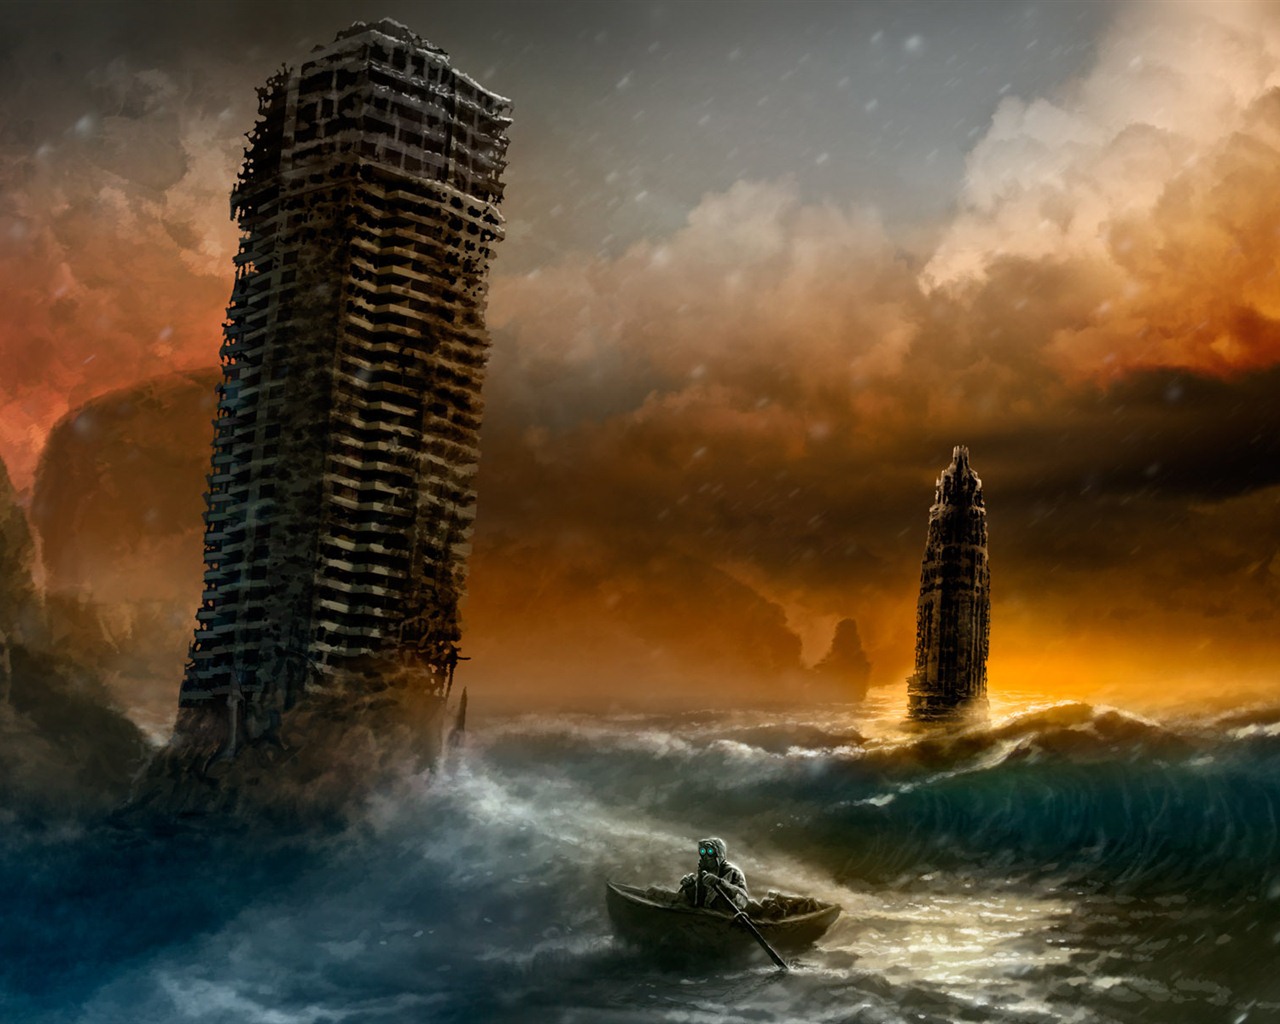 Romantically Apocalyptic creative painting wallpapers (1) #8 - 1280x1024